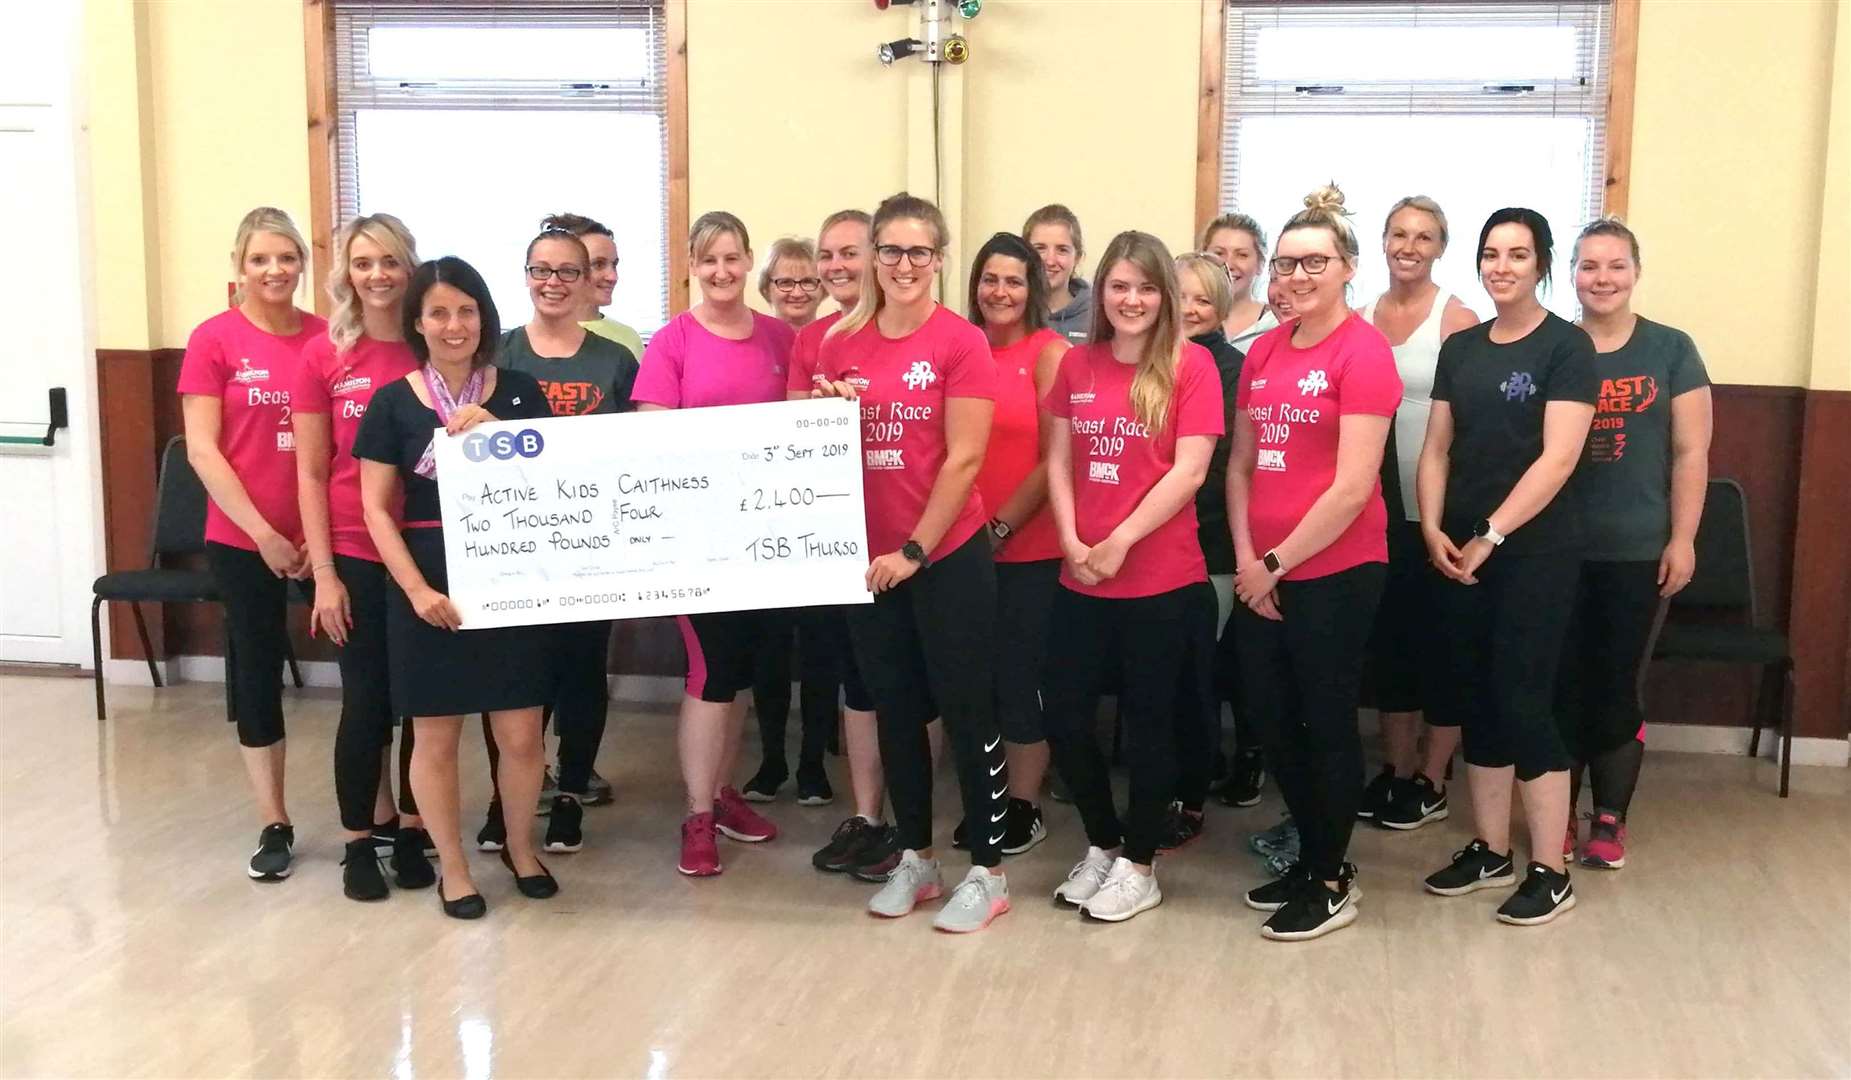 Anne Mackay, third from left, from Thurso TSB hands over a £2400 cheque to Sarah Dunnett from the Active Kids charity. Pictured with them are other charity members and TSB staff.